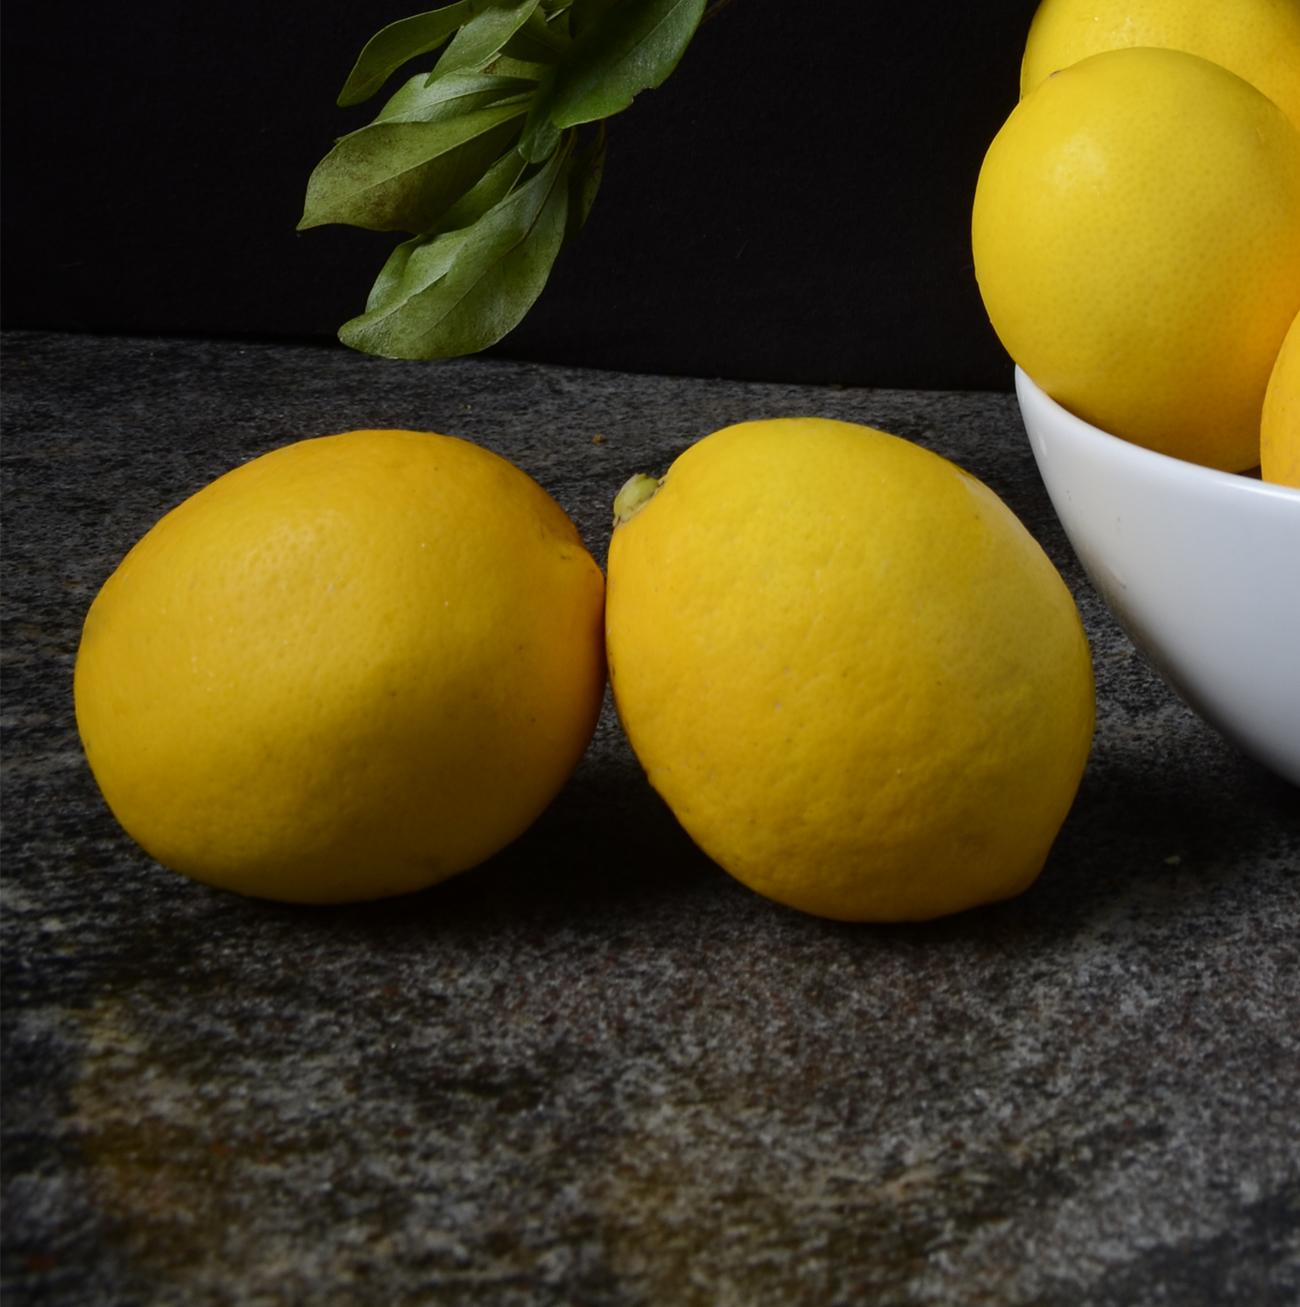 Limones II. From The Bodegones still life color photography  series - Photograph by Dora Franco